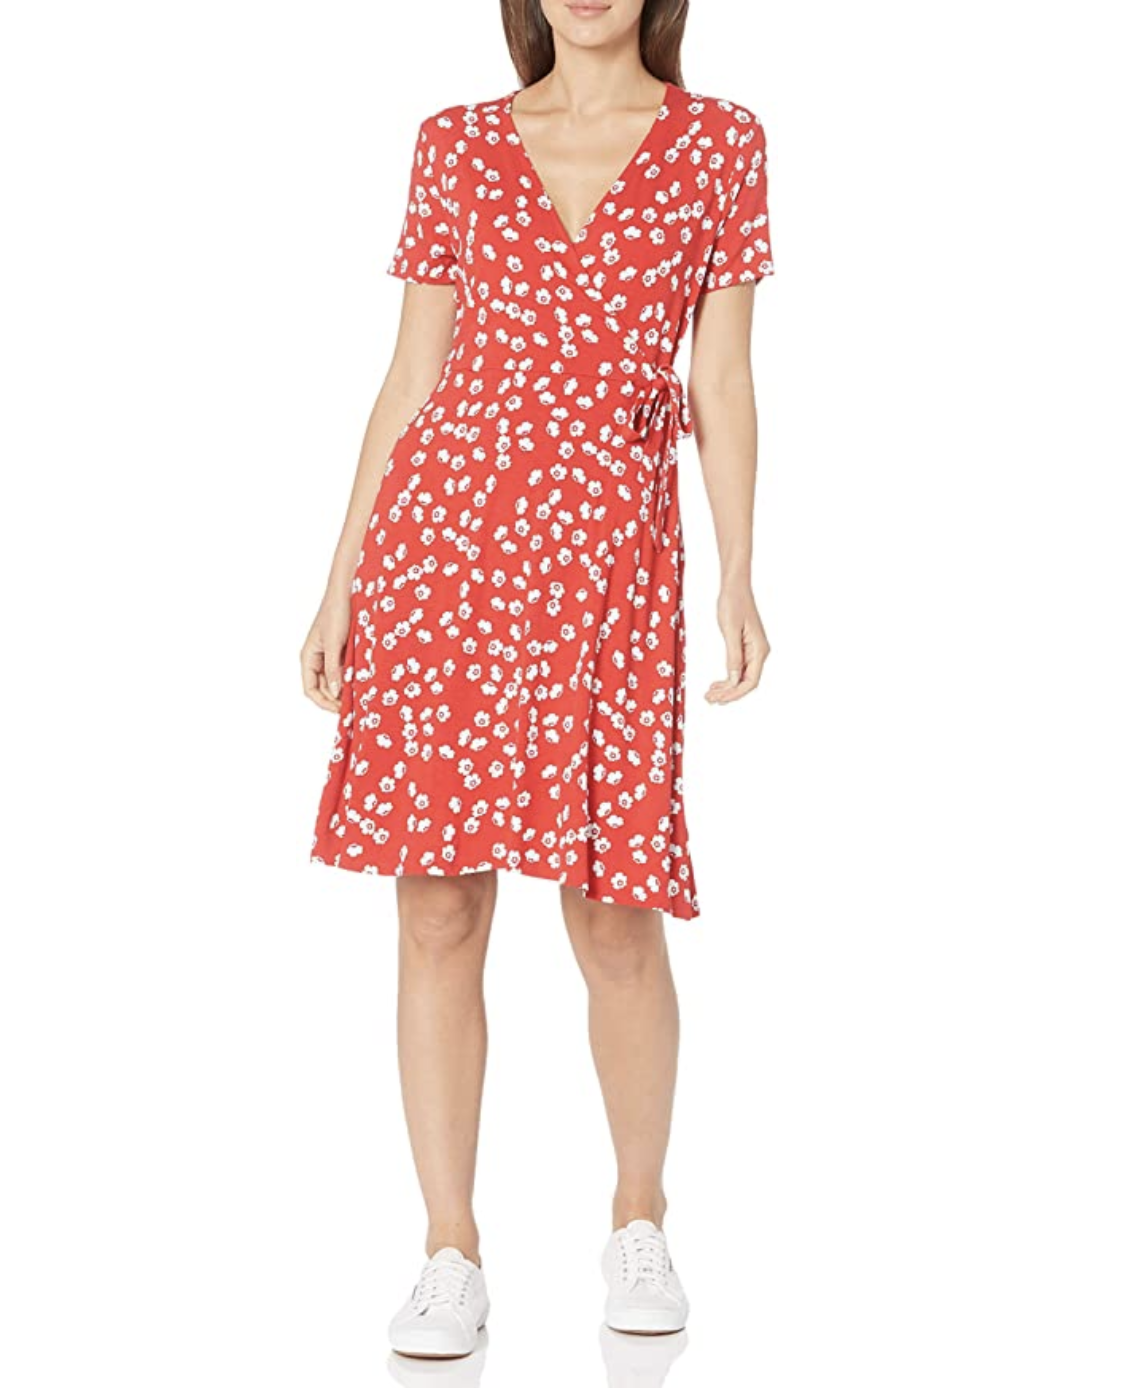 Amazon Essentials Simple Wrap Dress Is a Must-Have for Spring